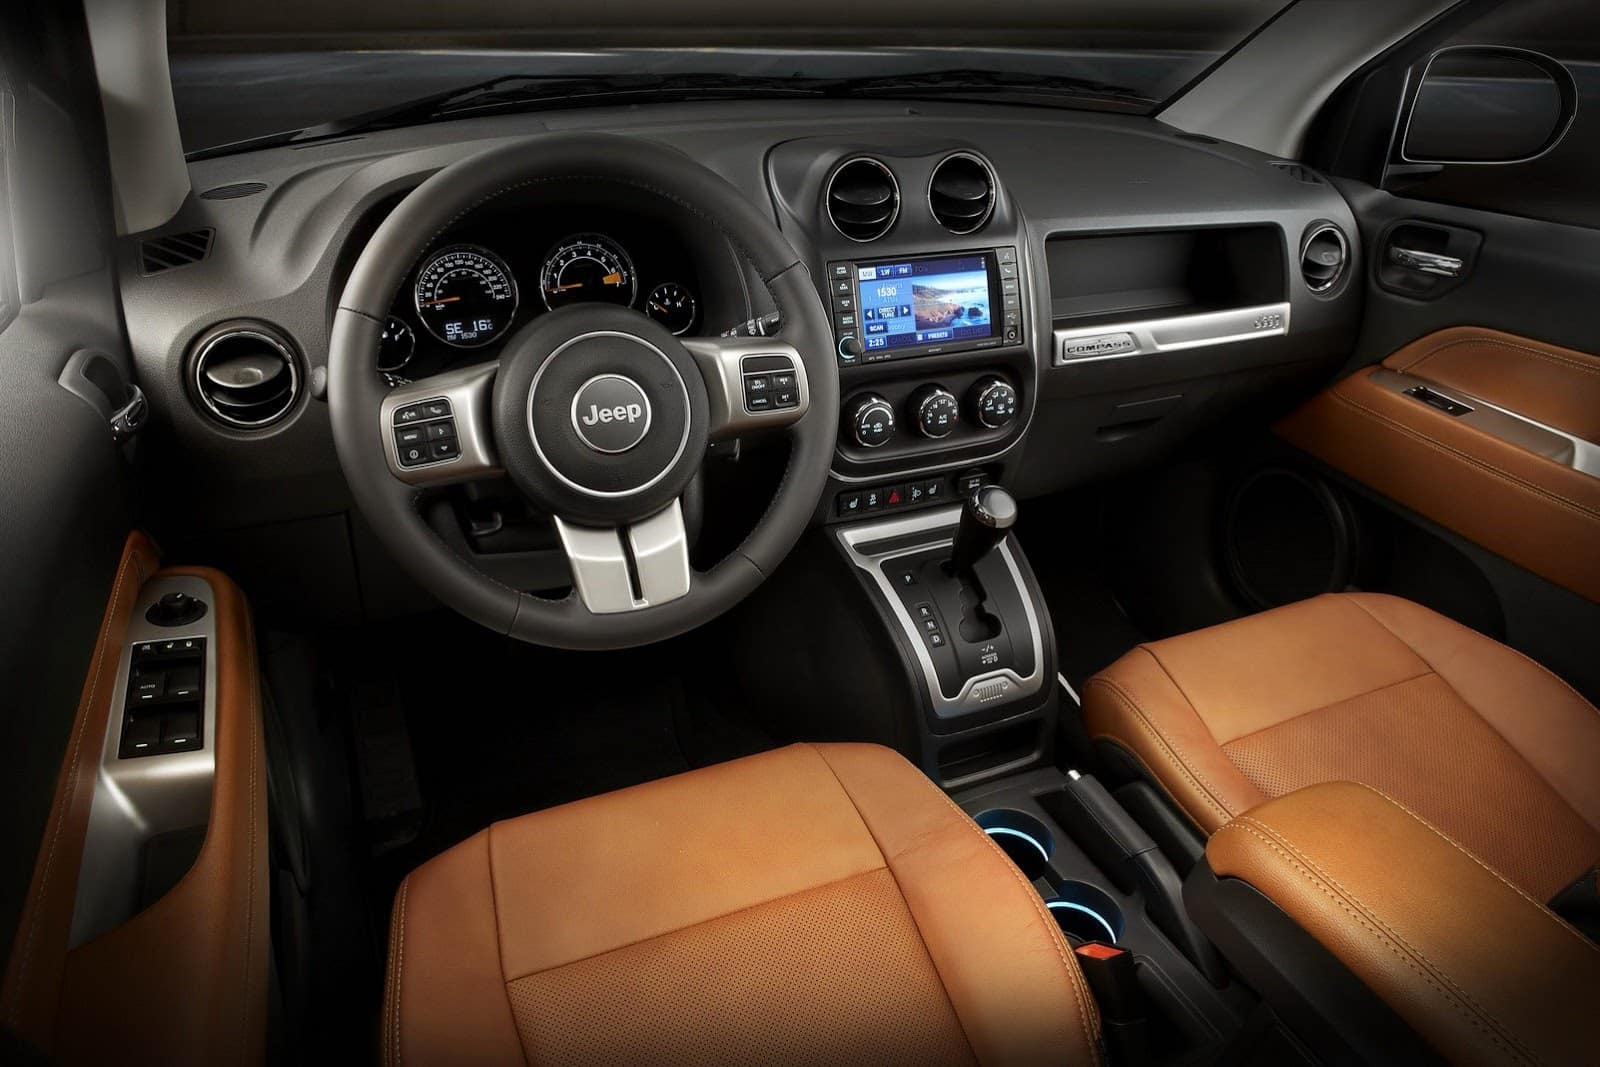 5 Top Interior Features of the Jeep Compass | Kendall Dodge Chrysler ...